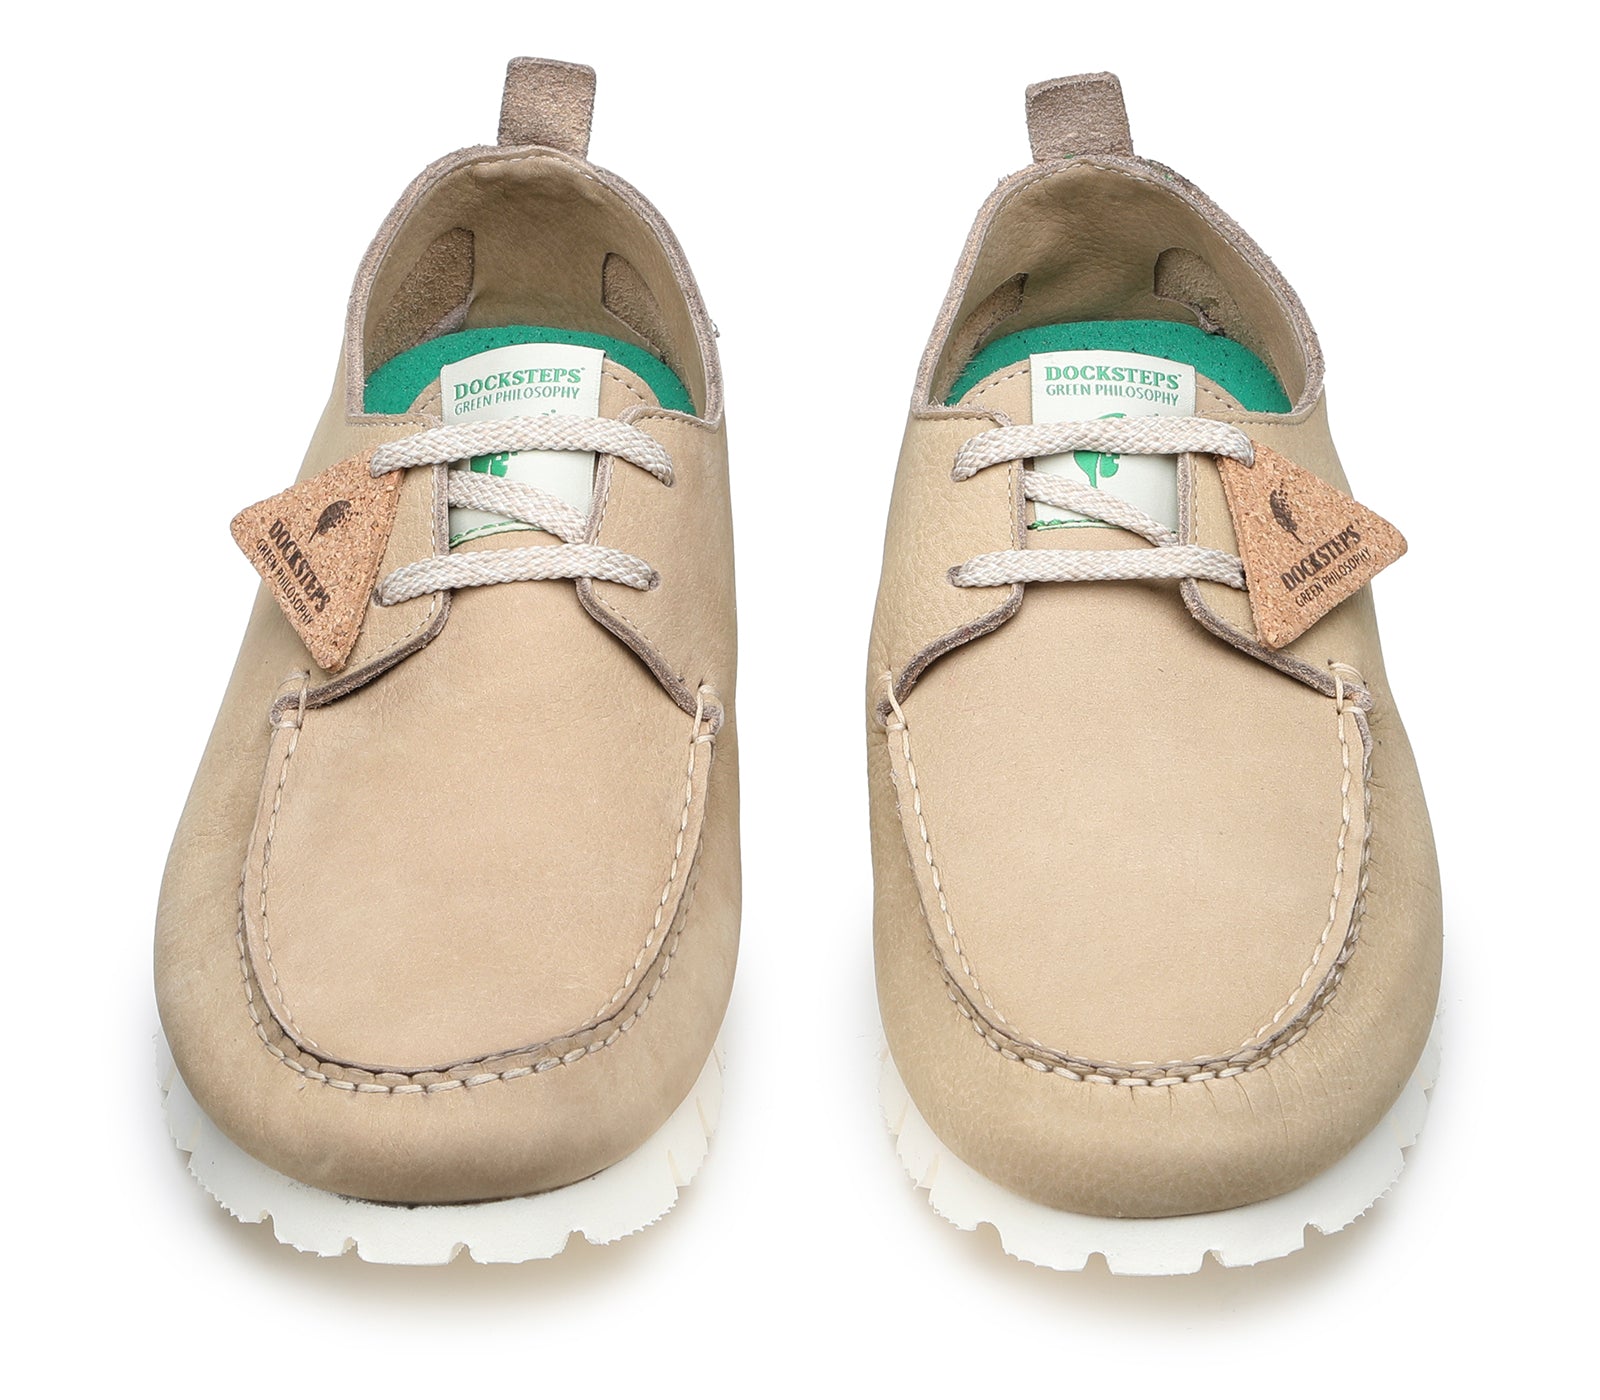 Men's Sustainable Moccasins in Taupe-colored Nubuck Leather